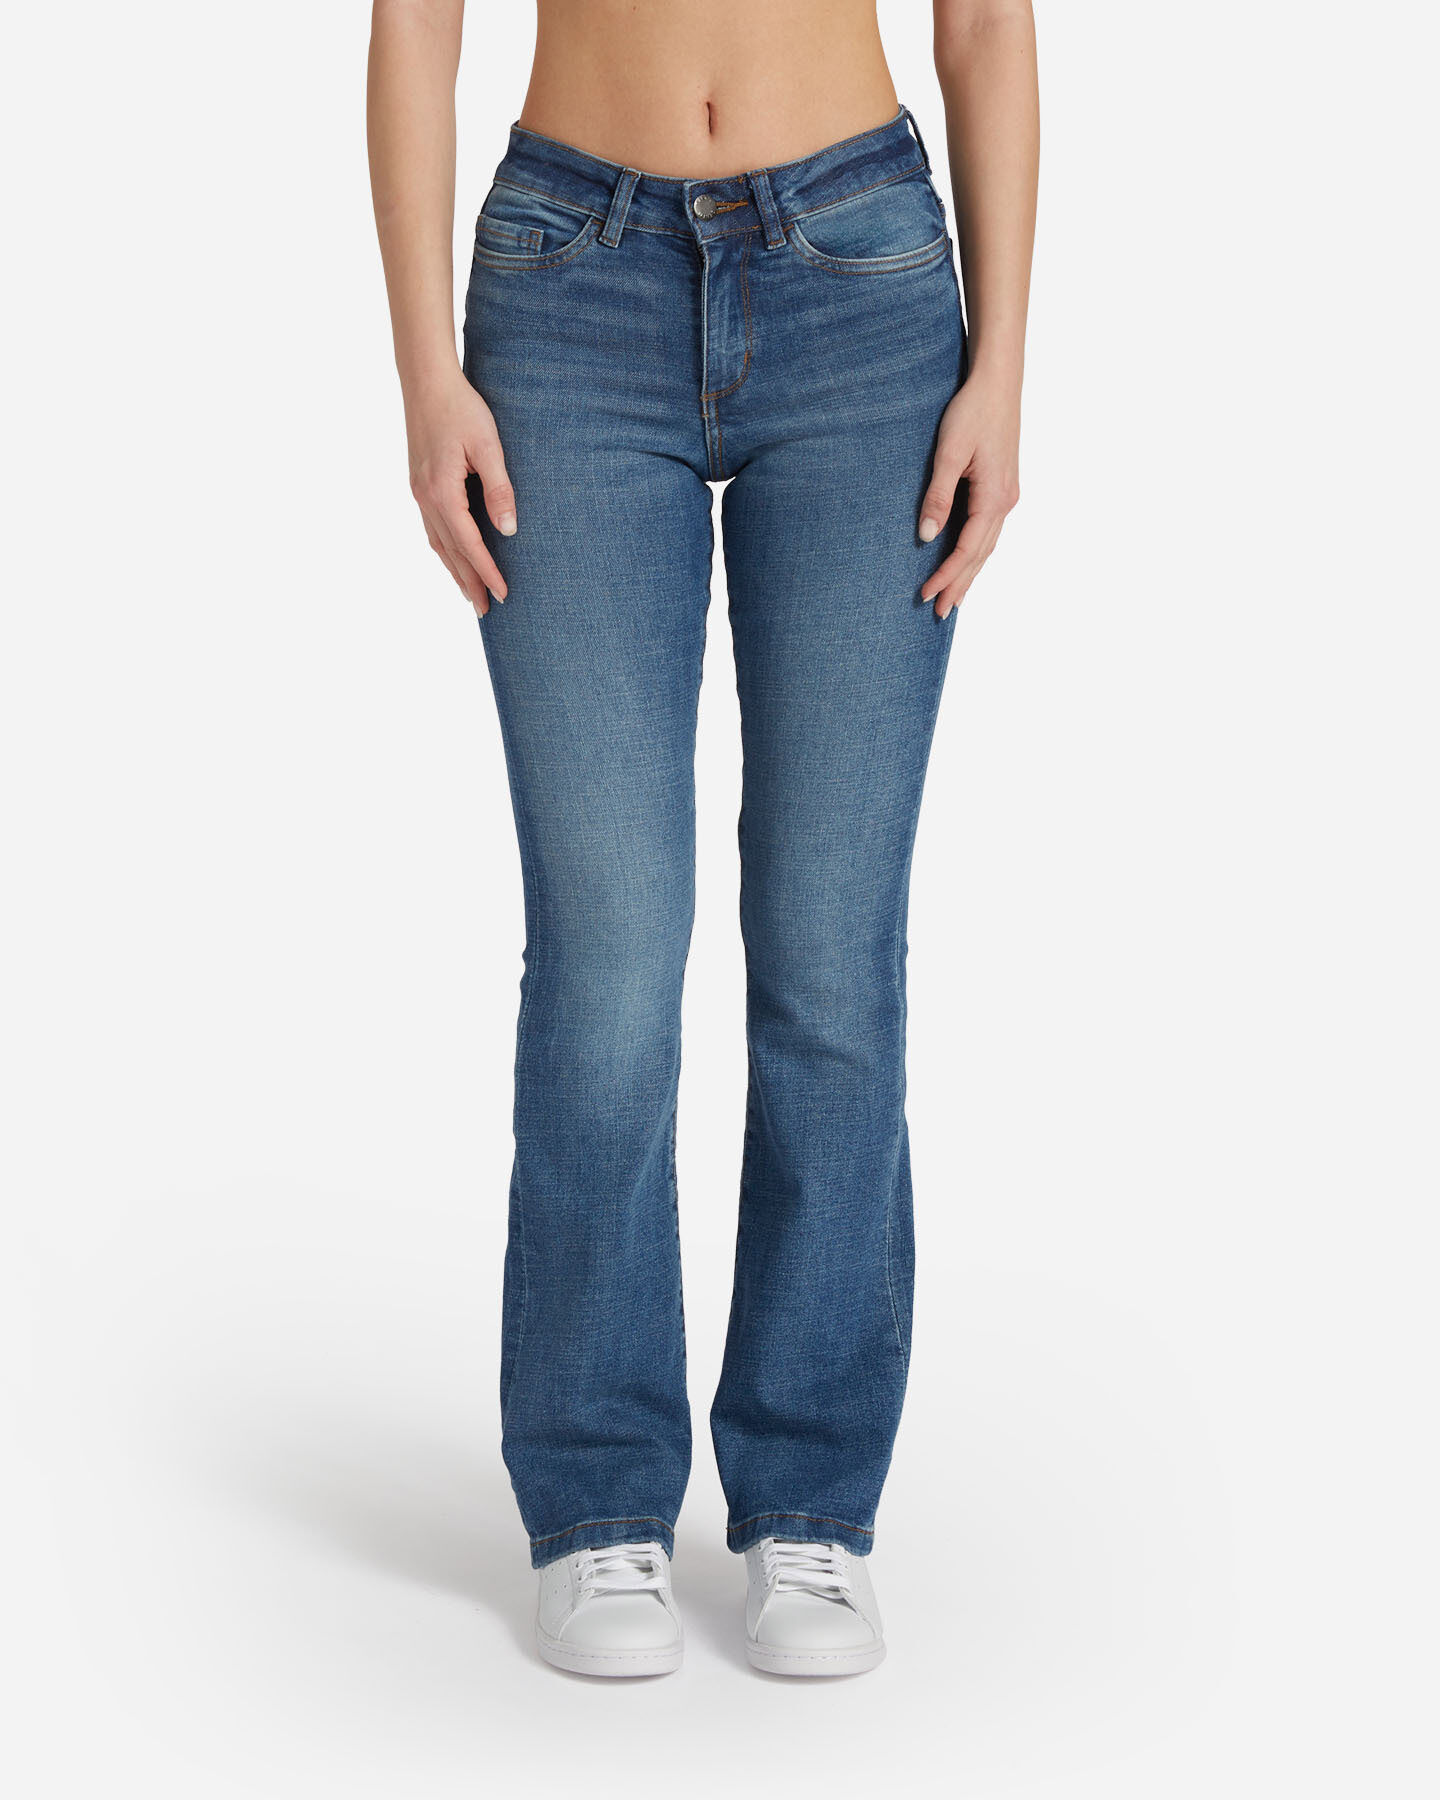  Jeans DACK'S ESSENTIAL W S4130220|MD|42 scatto 0